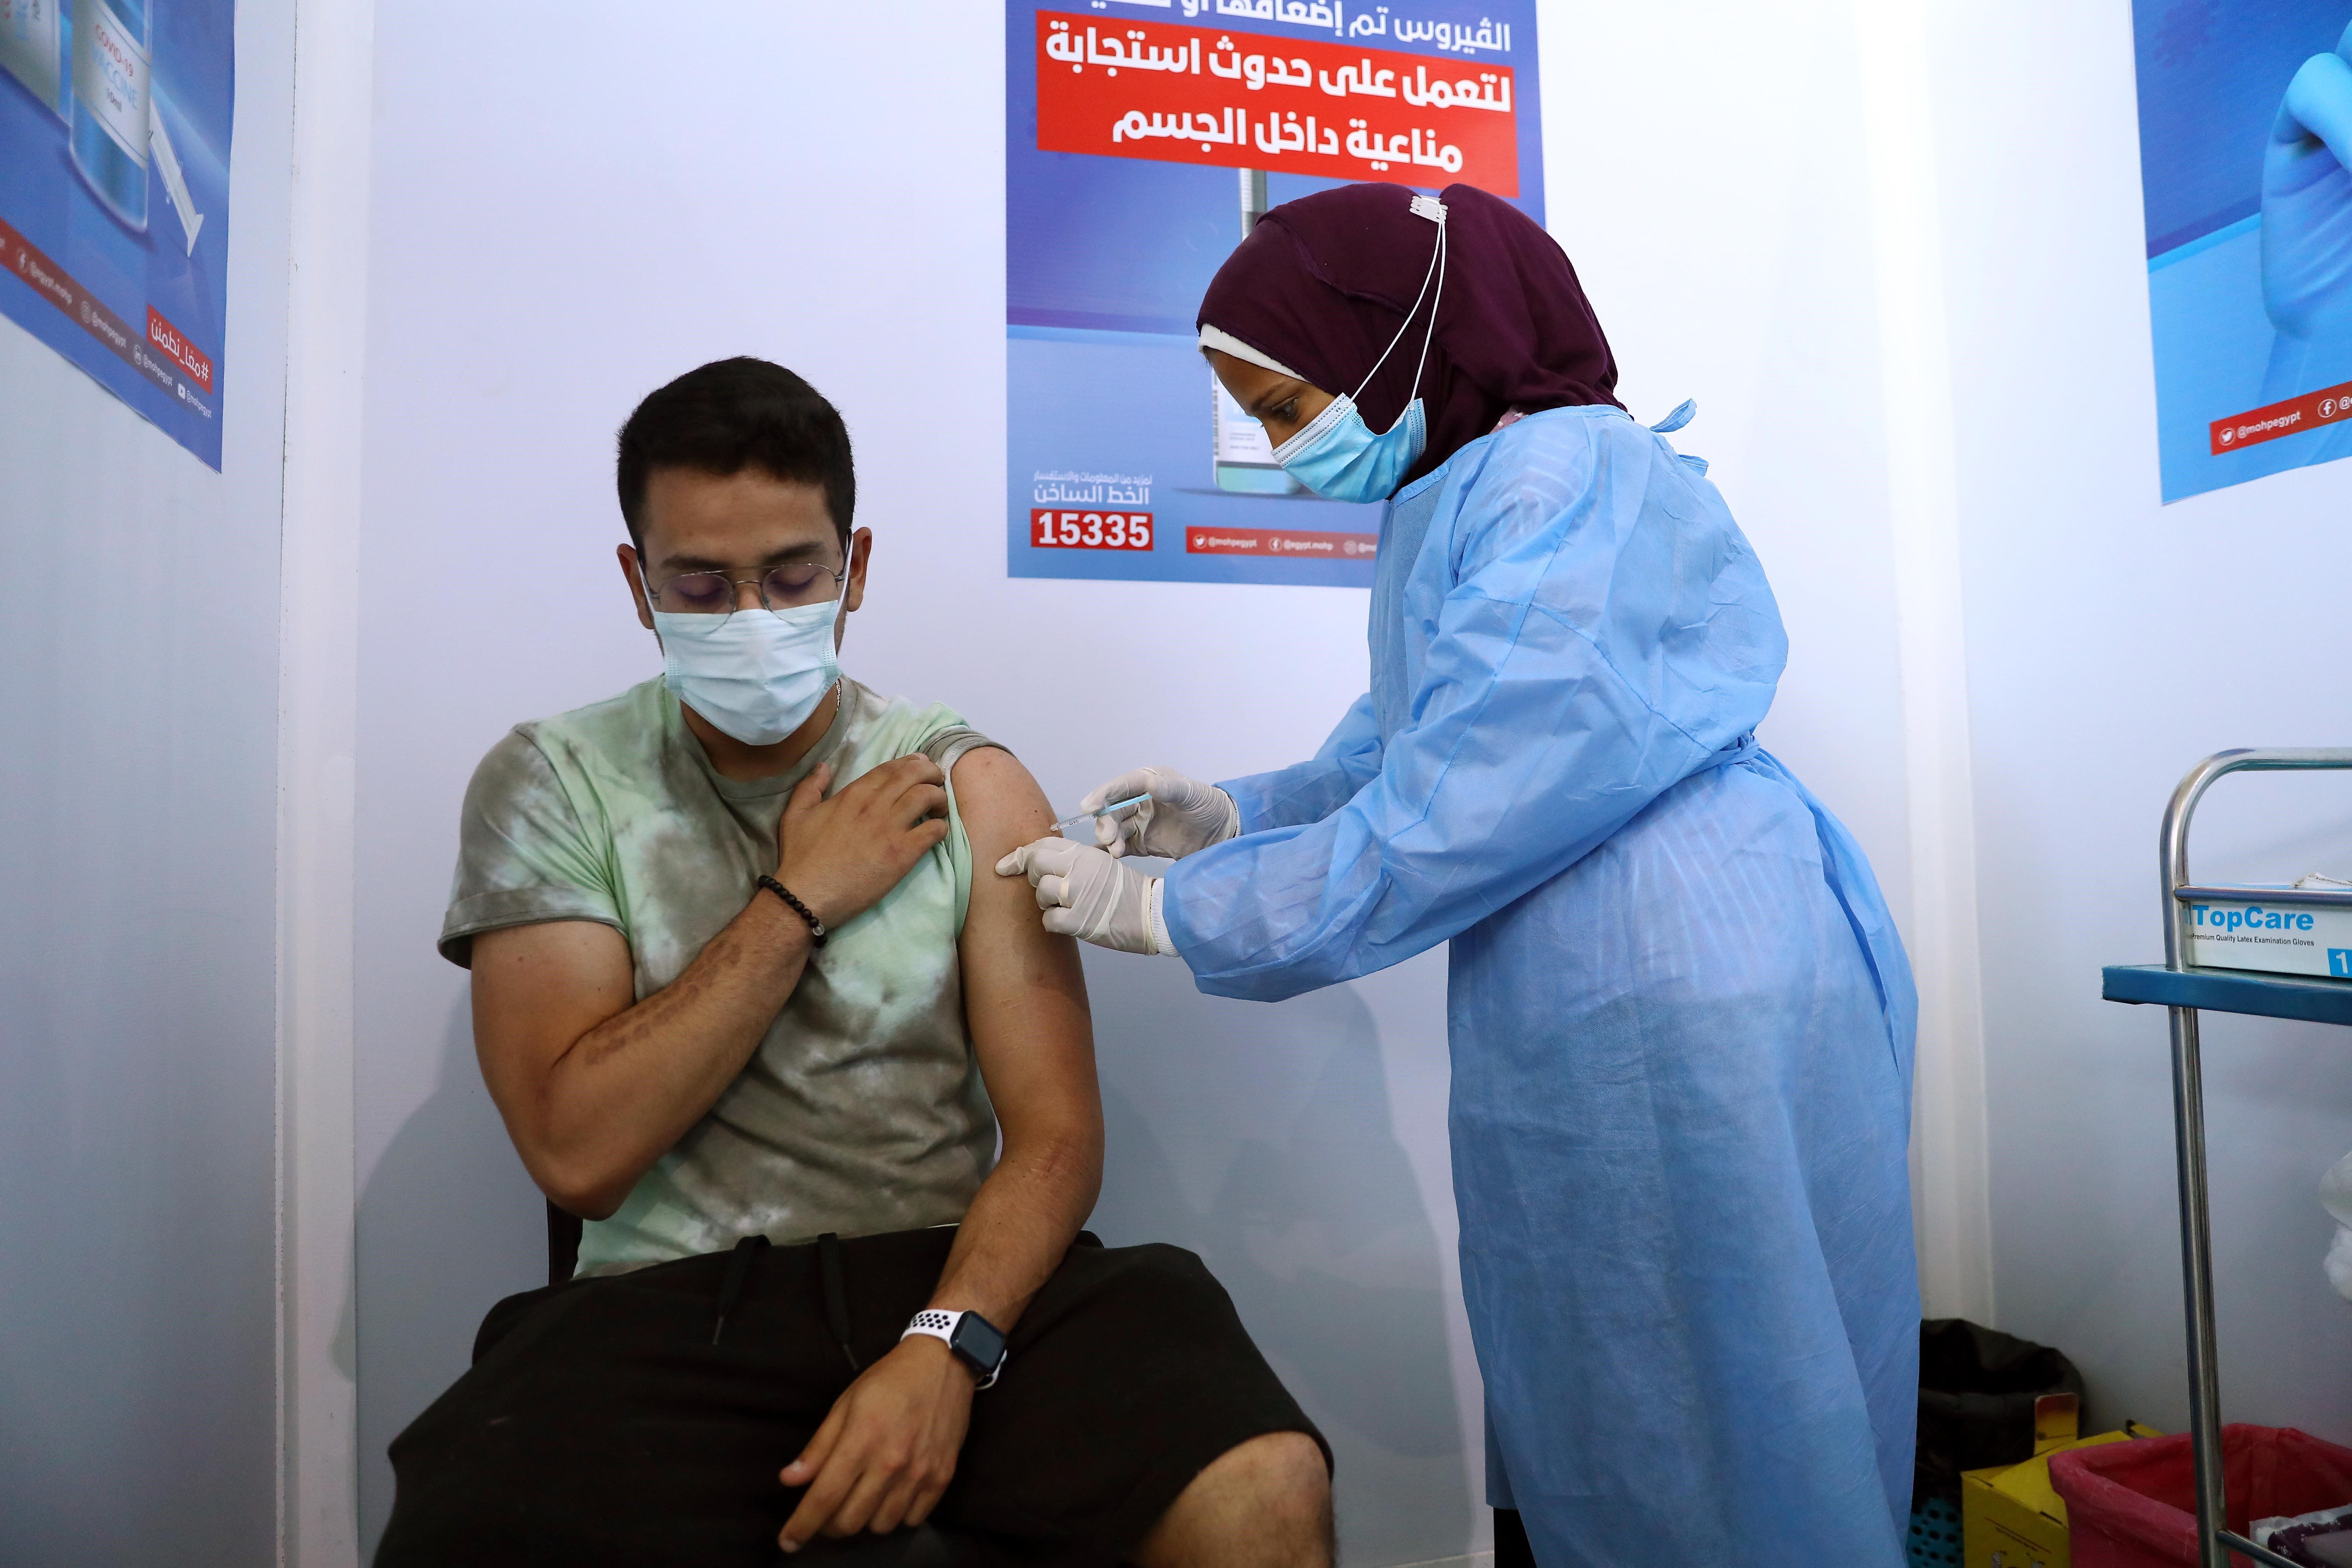 A man receives the COVID-19 vaccine at a mass vaccination venue in Cairo, Egypt.&nbsp;